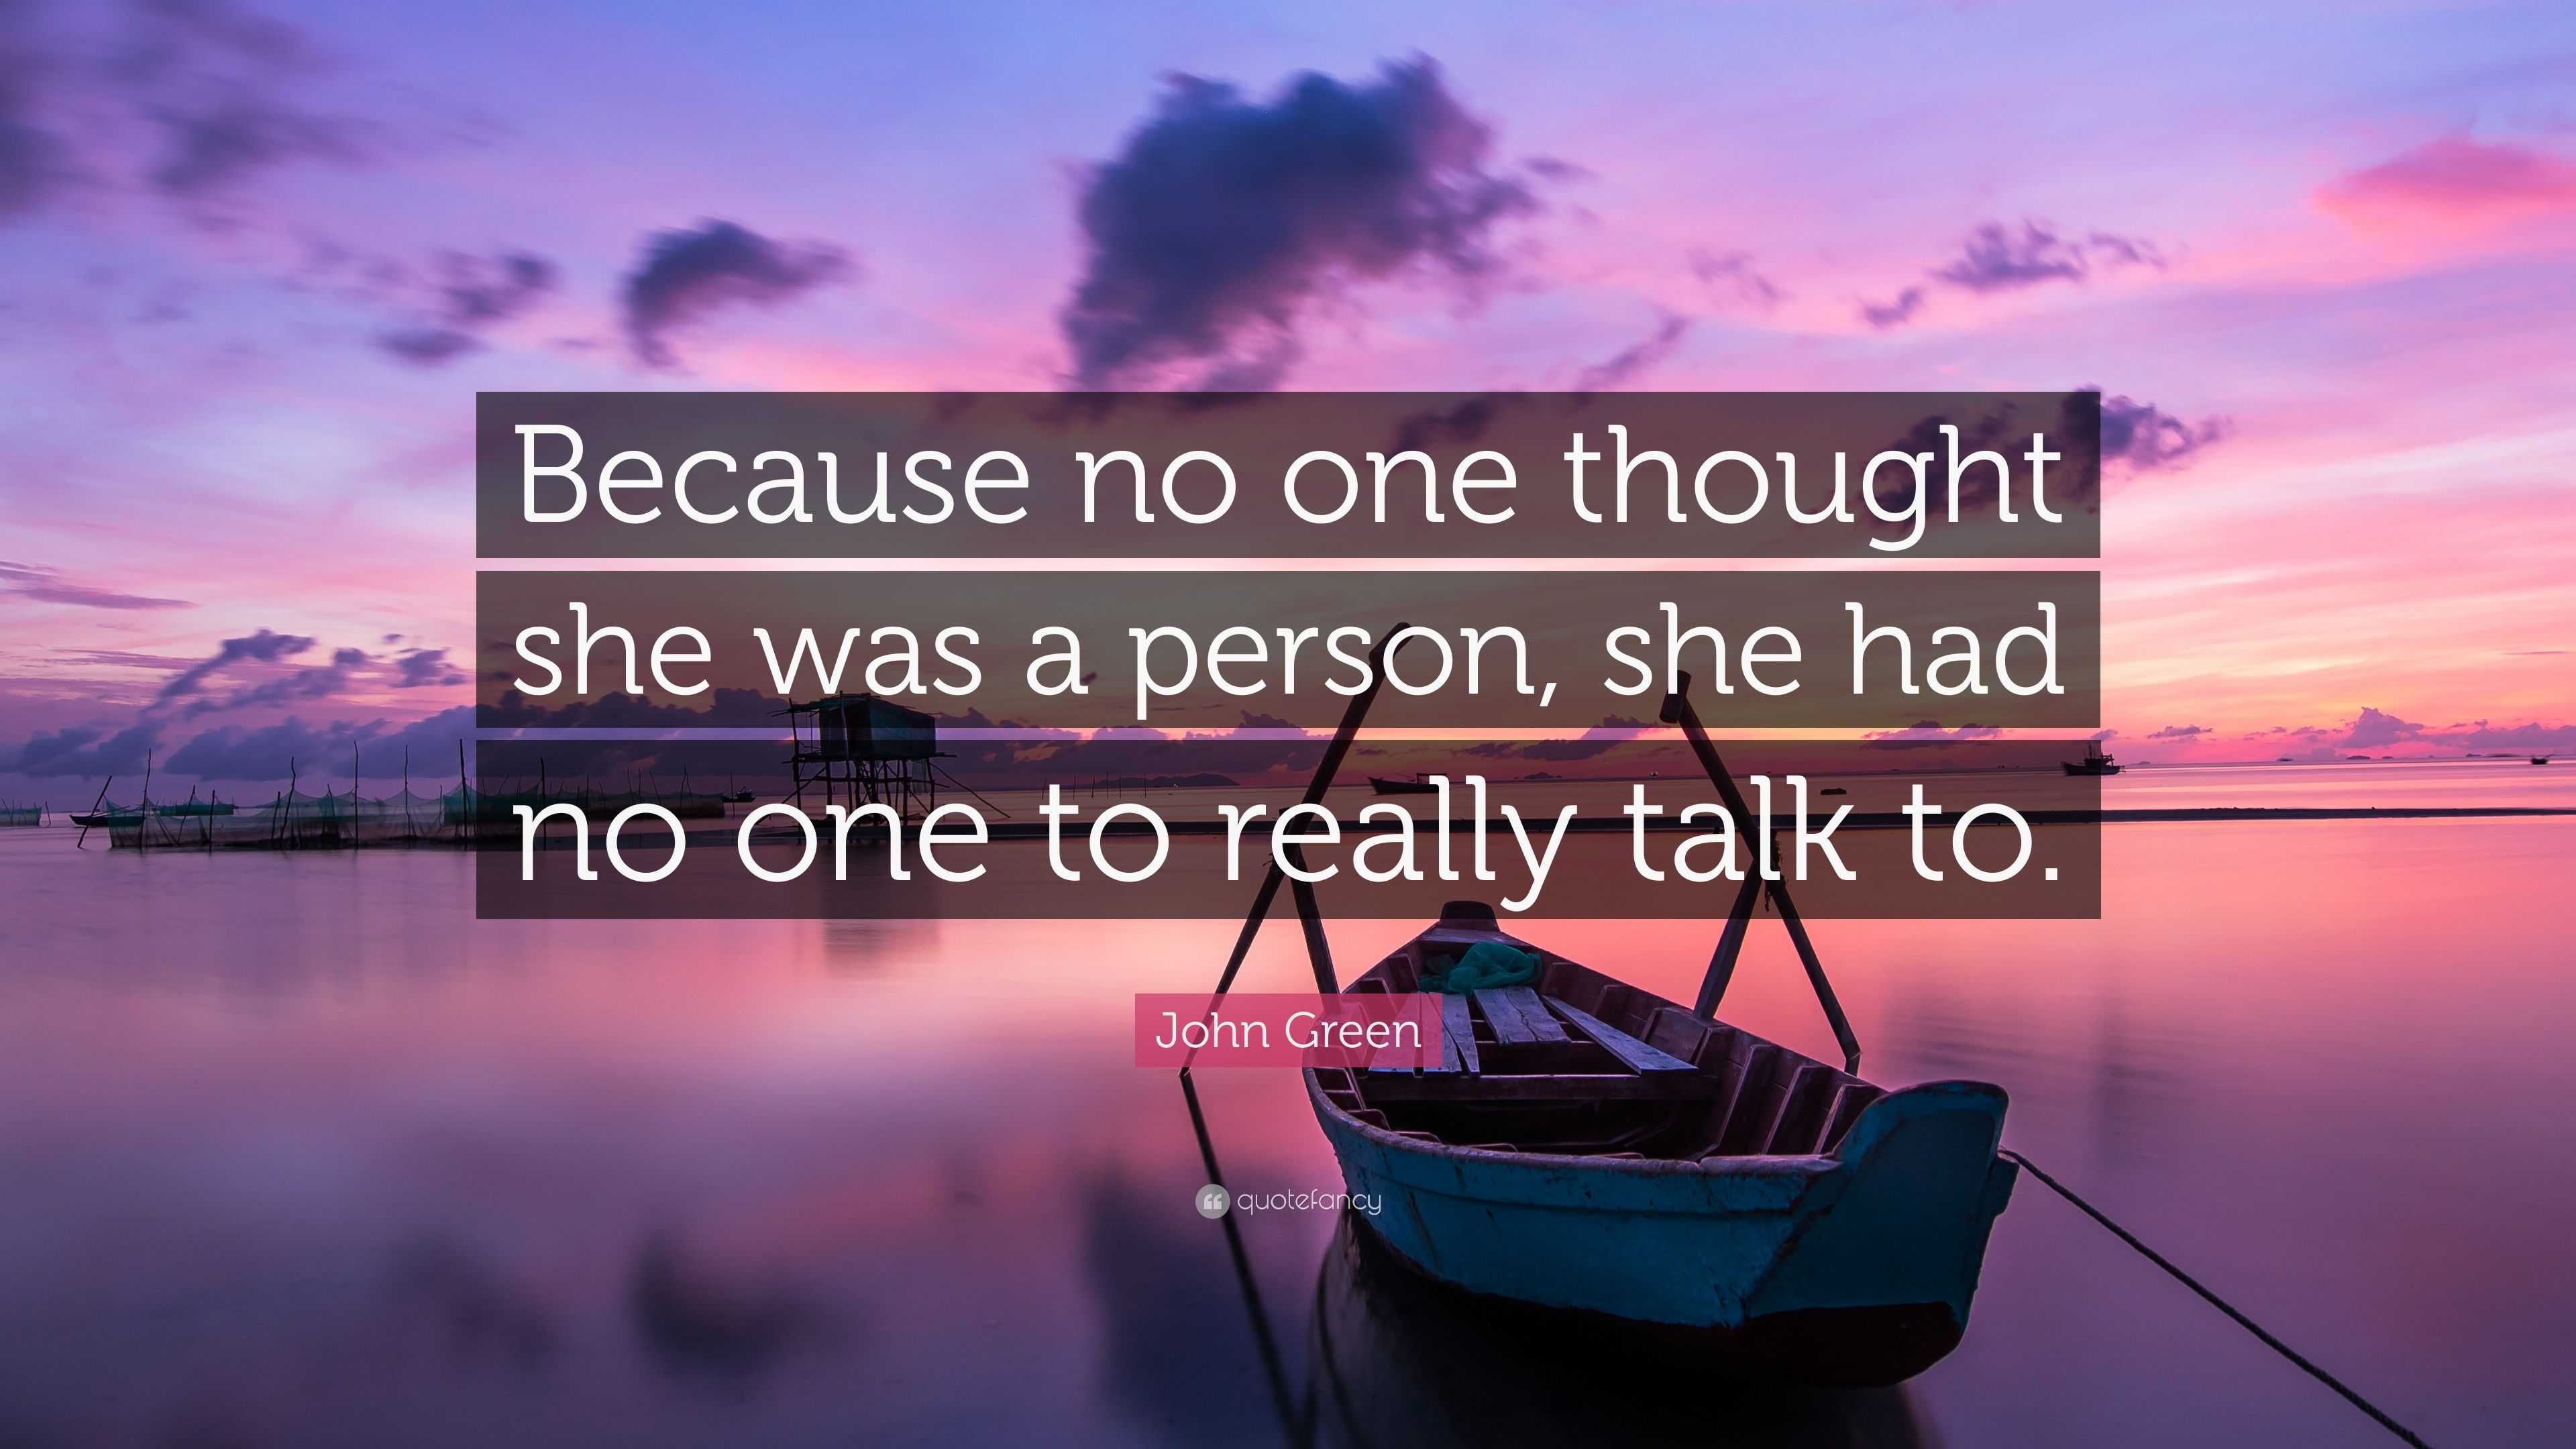 John Green Quote: “Because no one thought she was a person, she had no ...